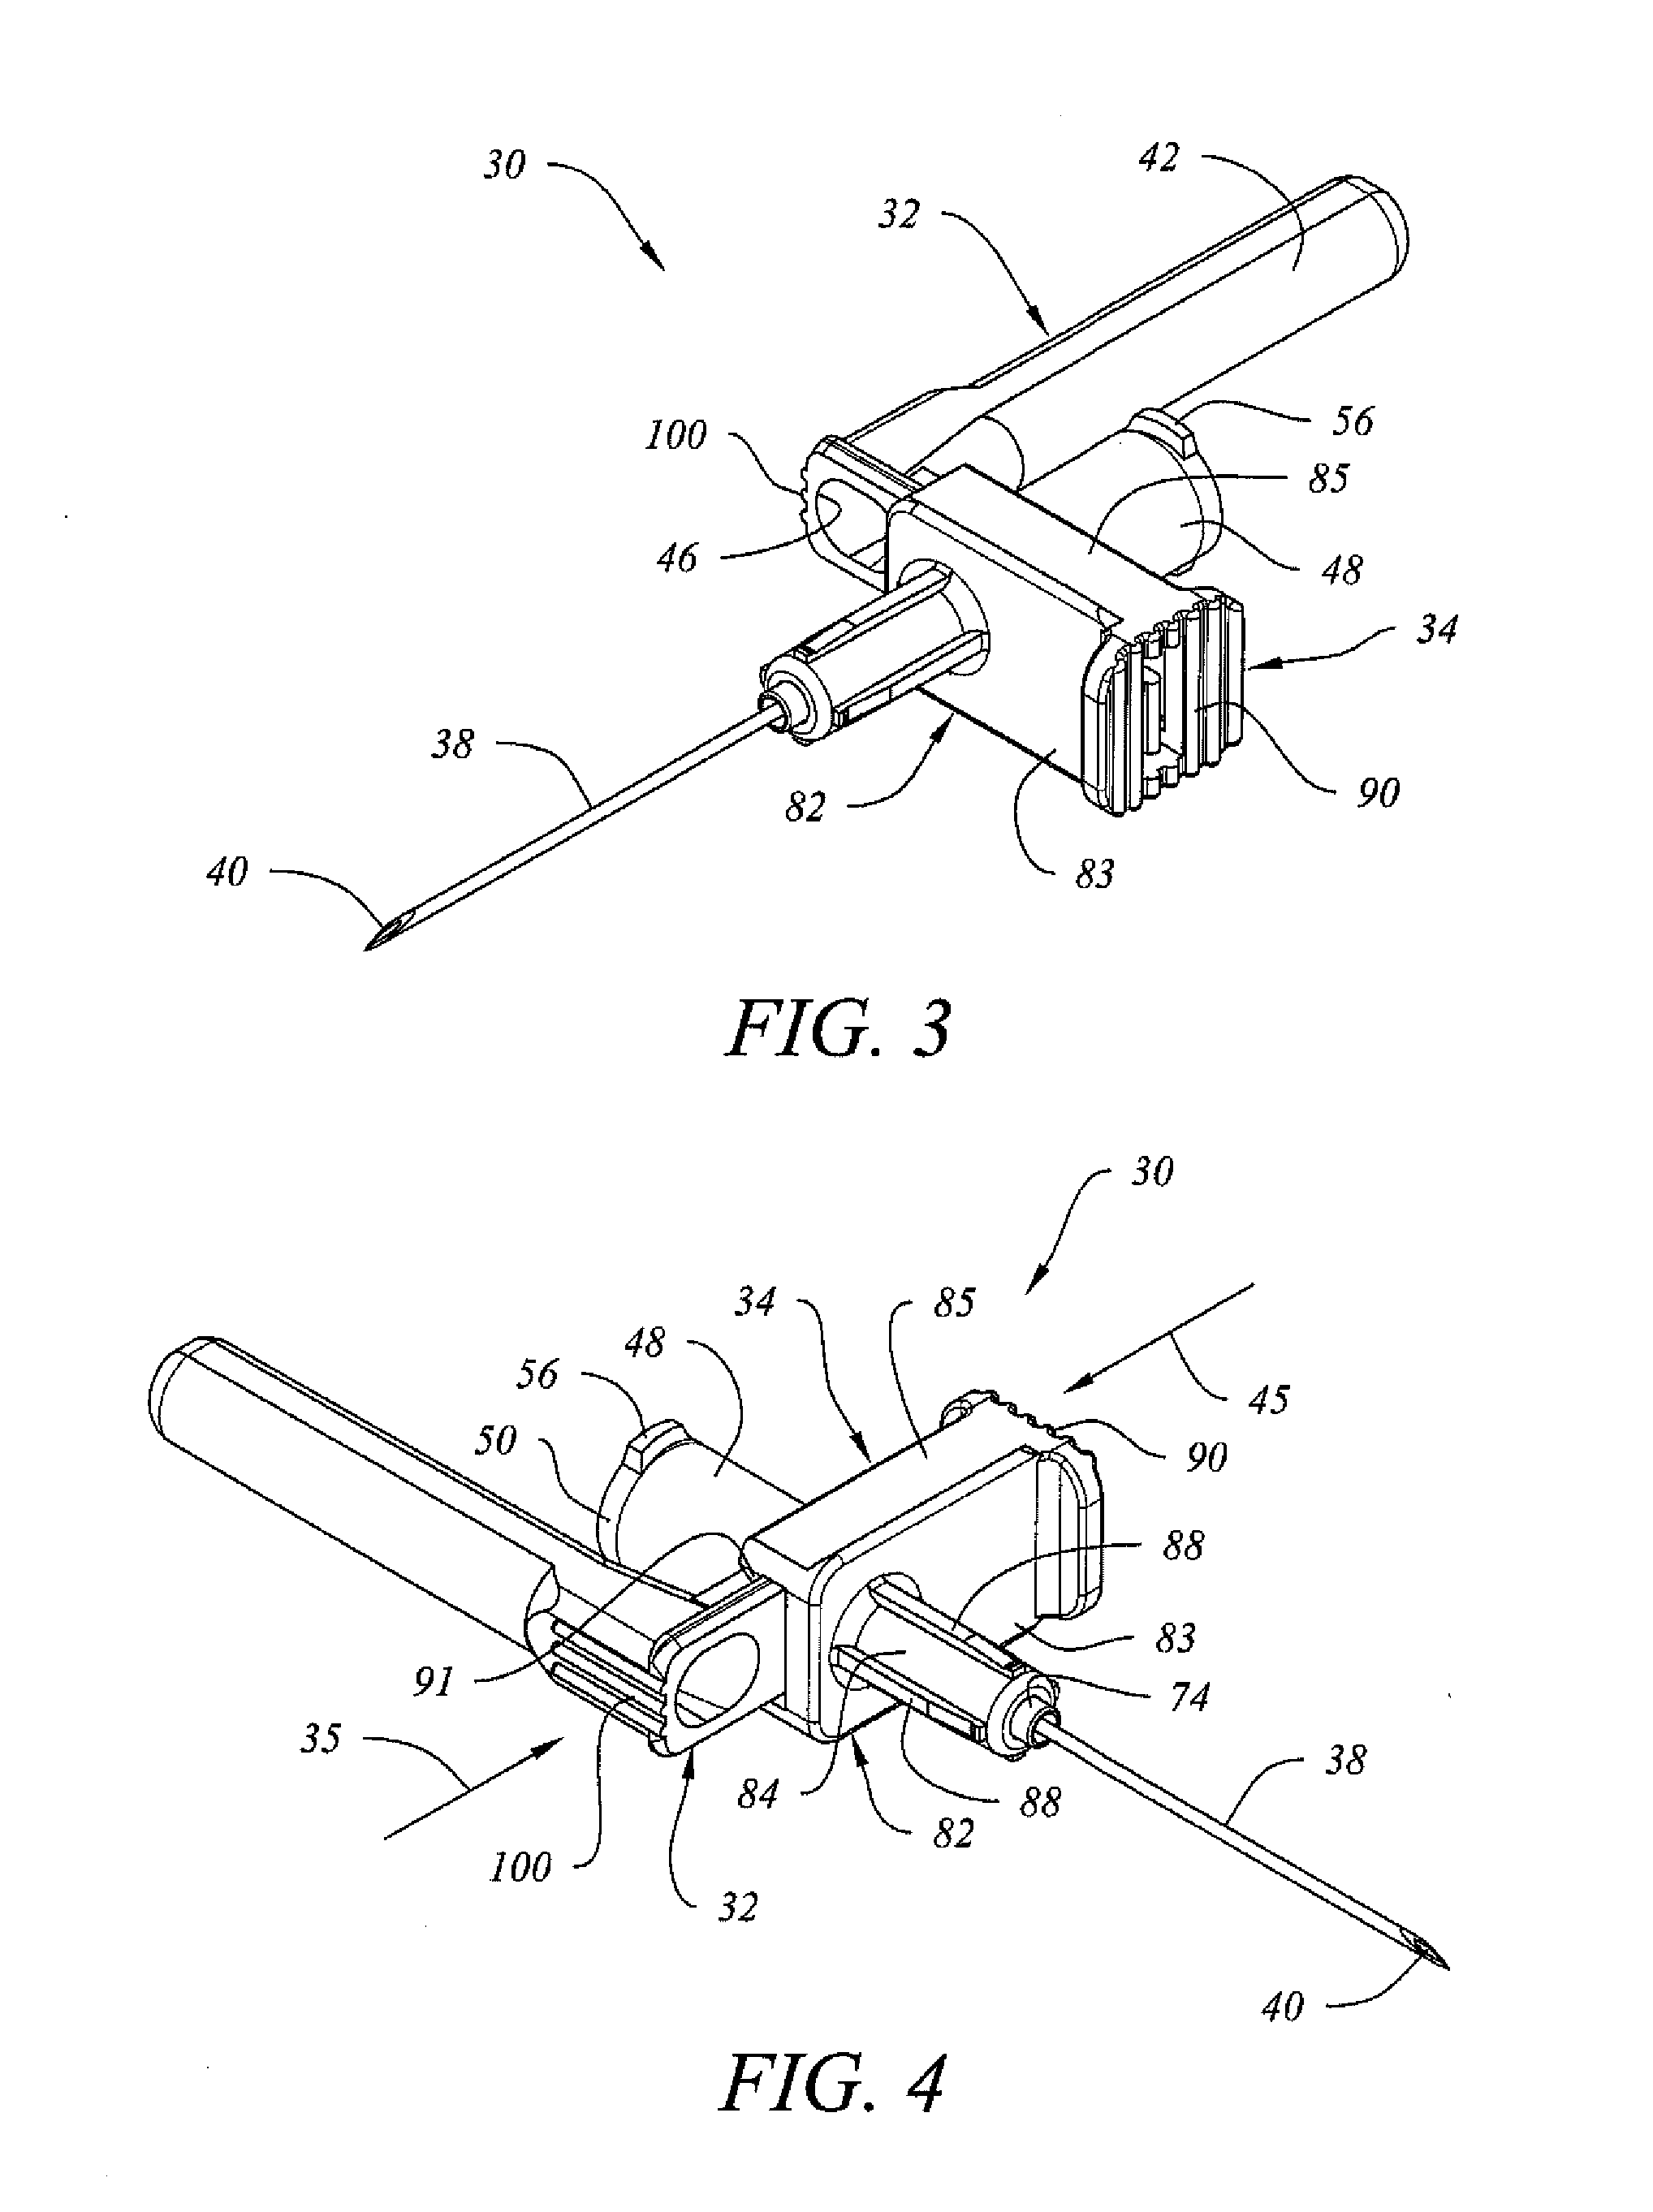 Combined Medical Device with Sliding Frontal Attachment and Retractable Needle